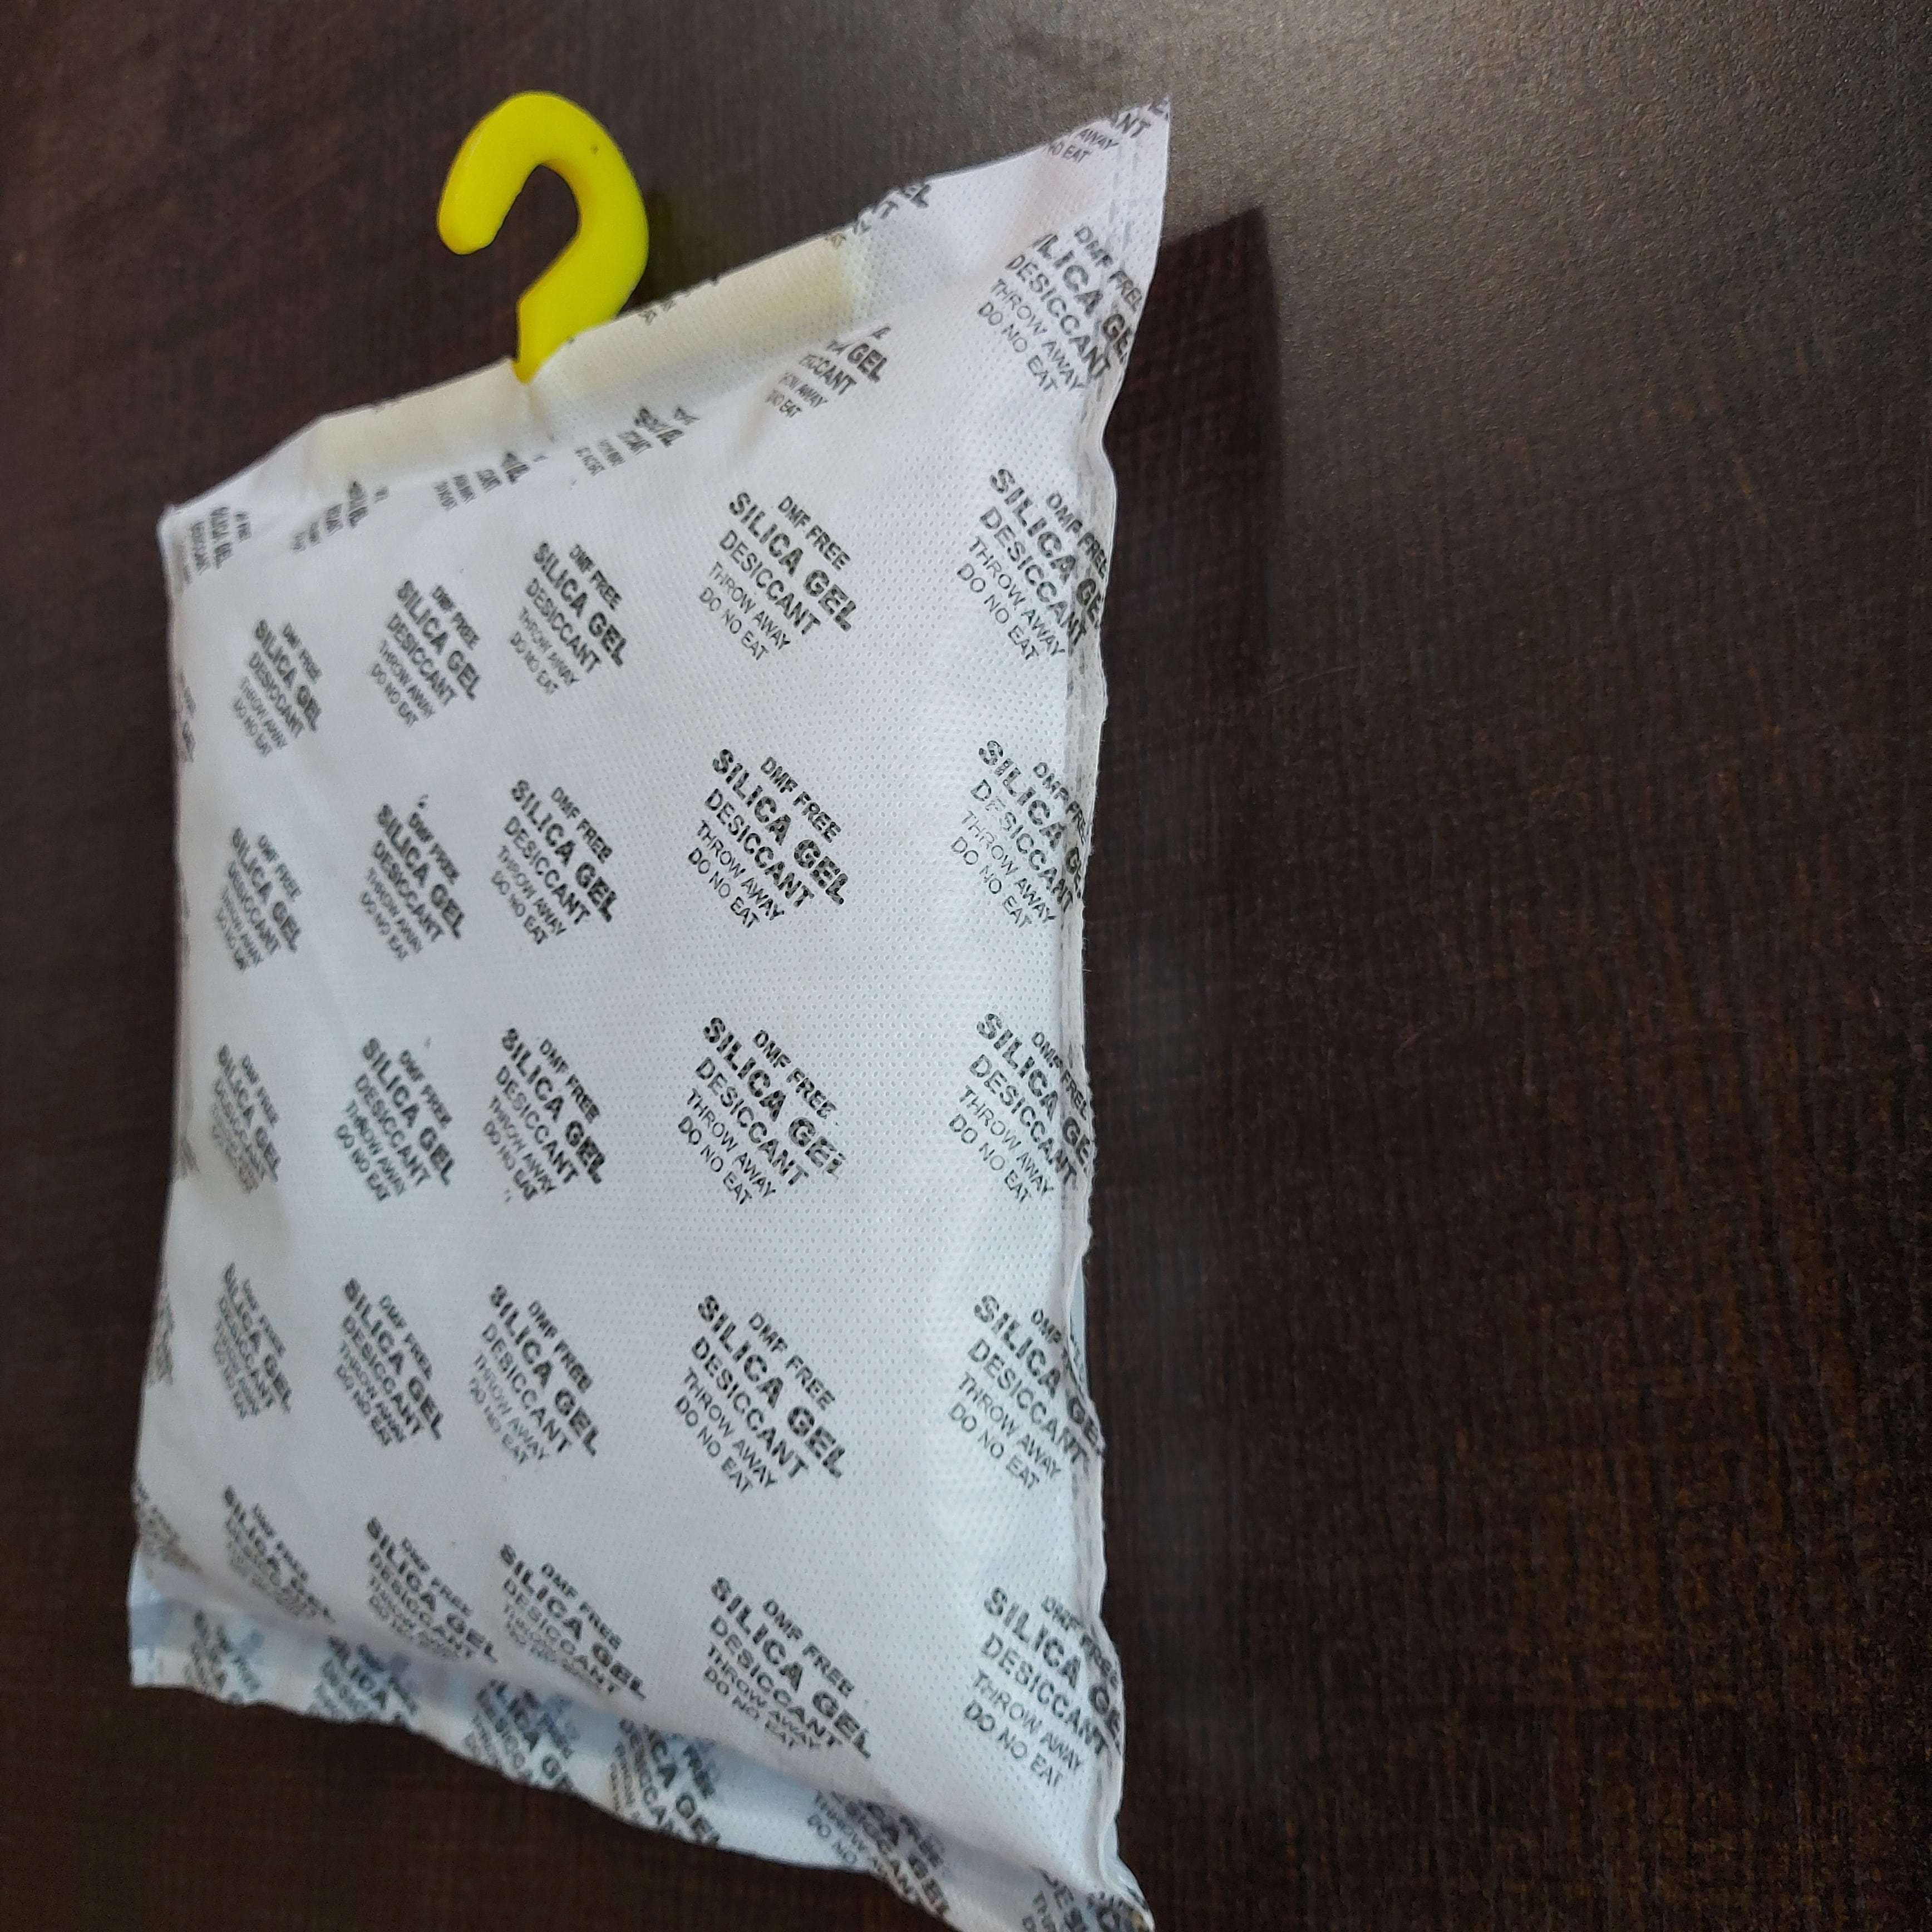 White Silica Gel in Sewn Cotton Bags 20 x 1Kg from IBHS Ltd